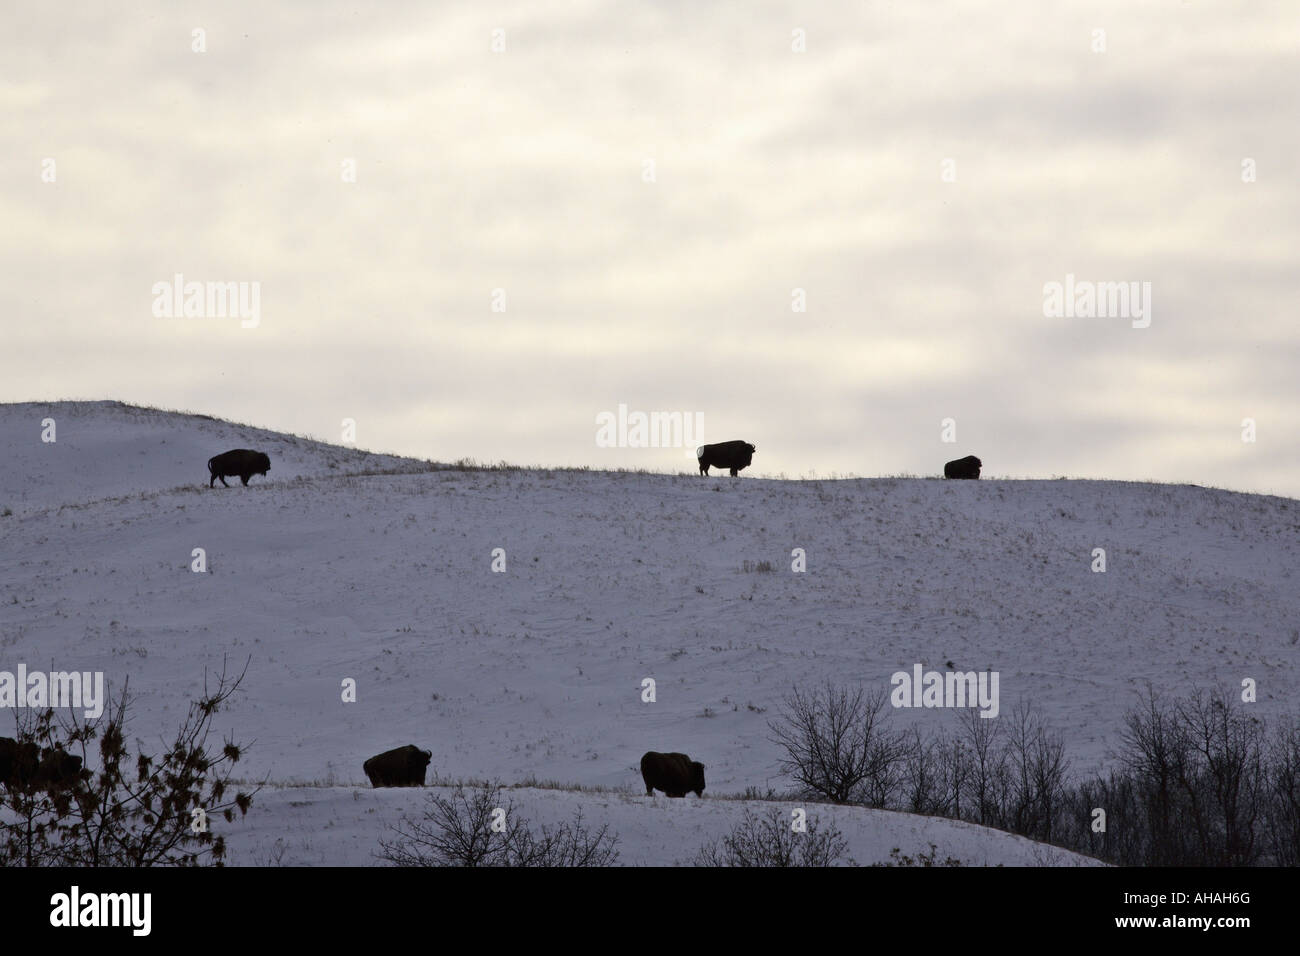 Painet jl7167 american bison athabascae bovine mammal largest terrestrial north america inhabited great plains united states Stock Photo